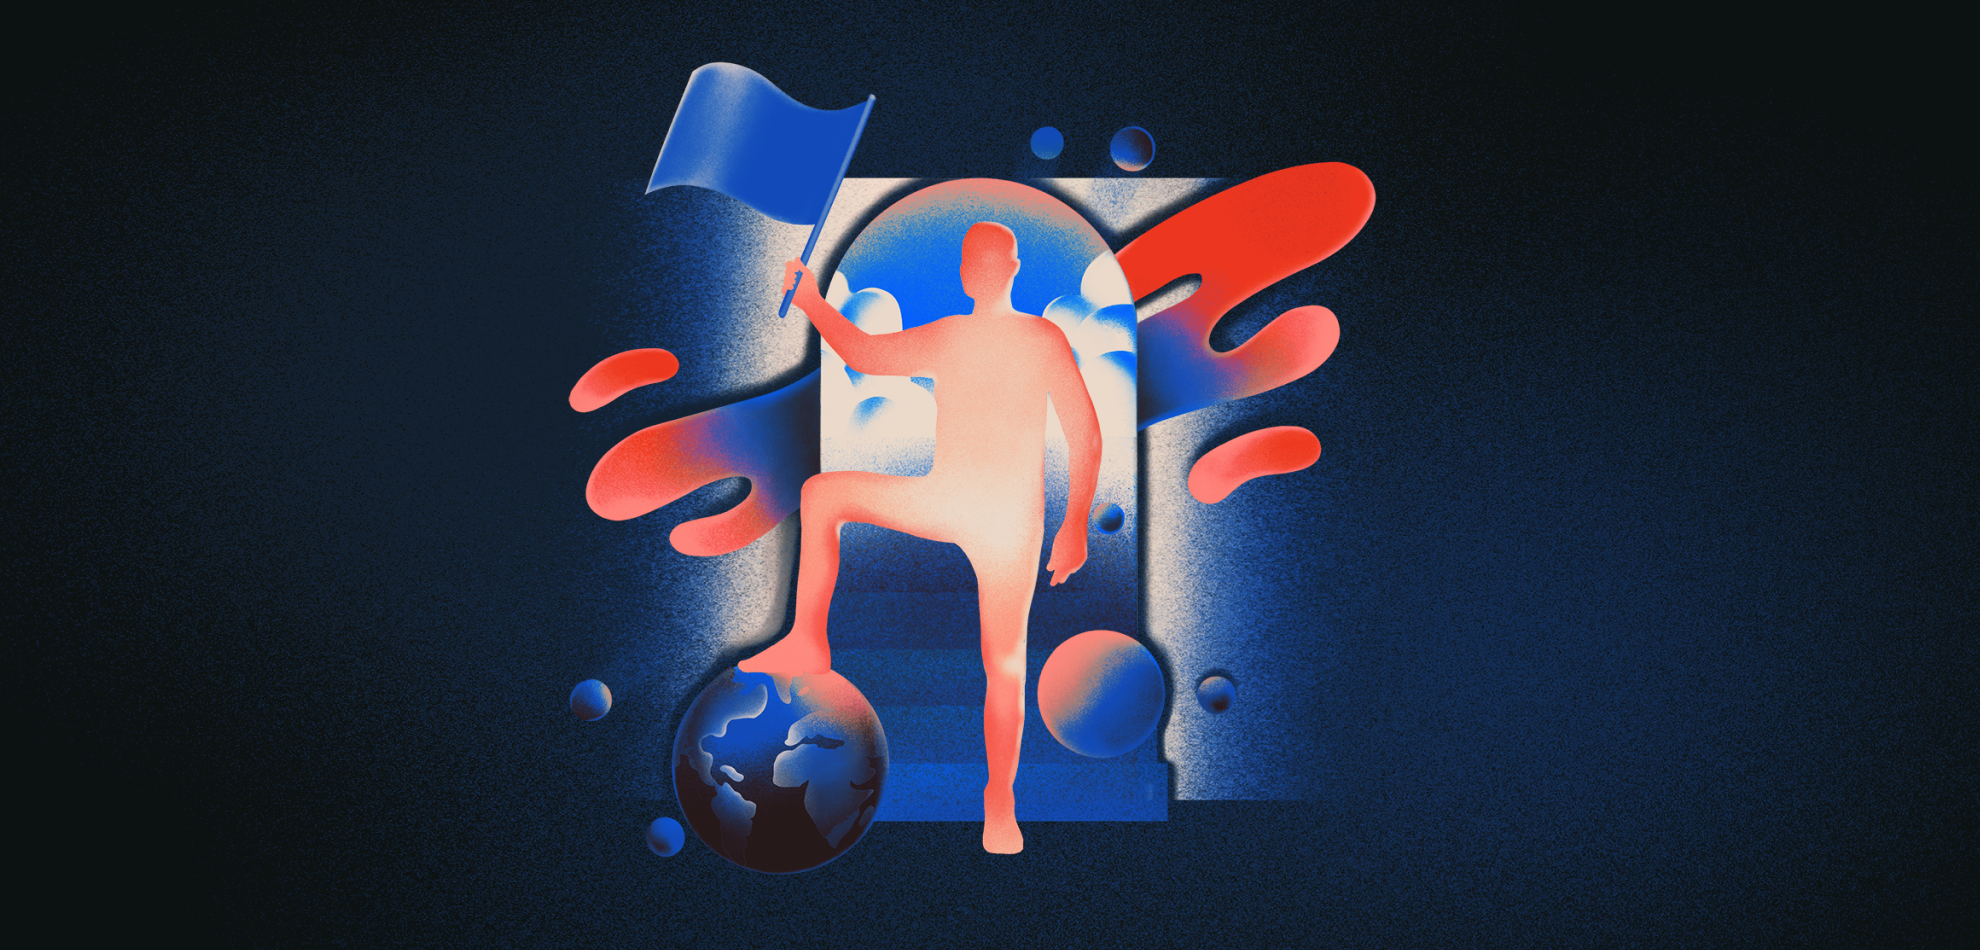 Abstract illustrated image of a body holding a flag